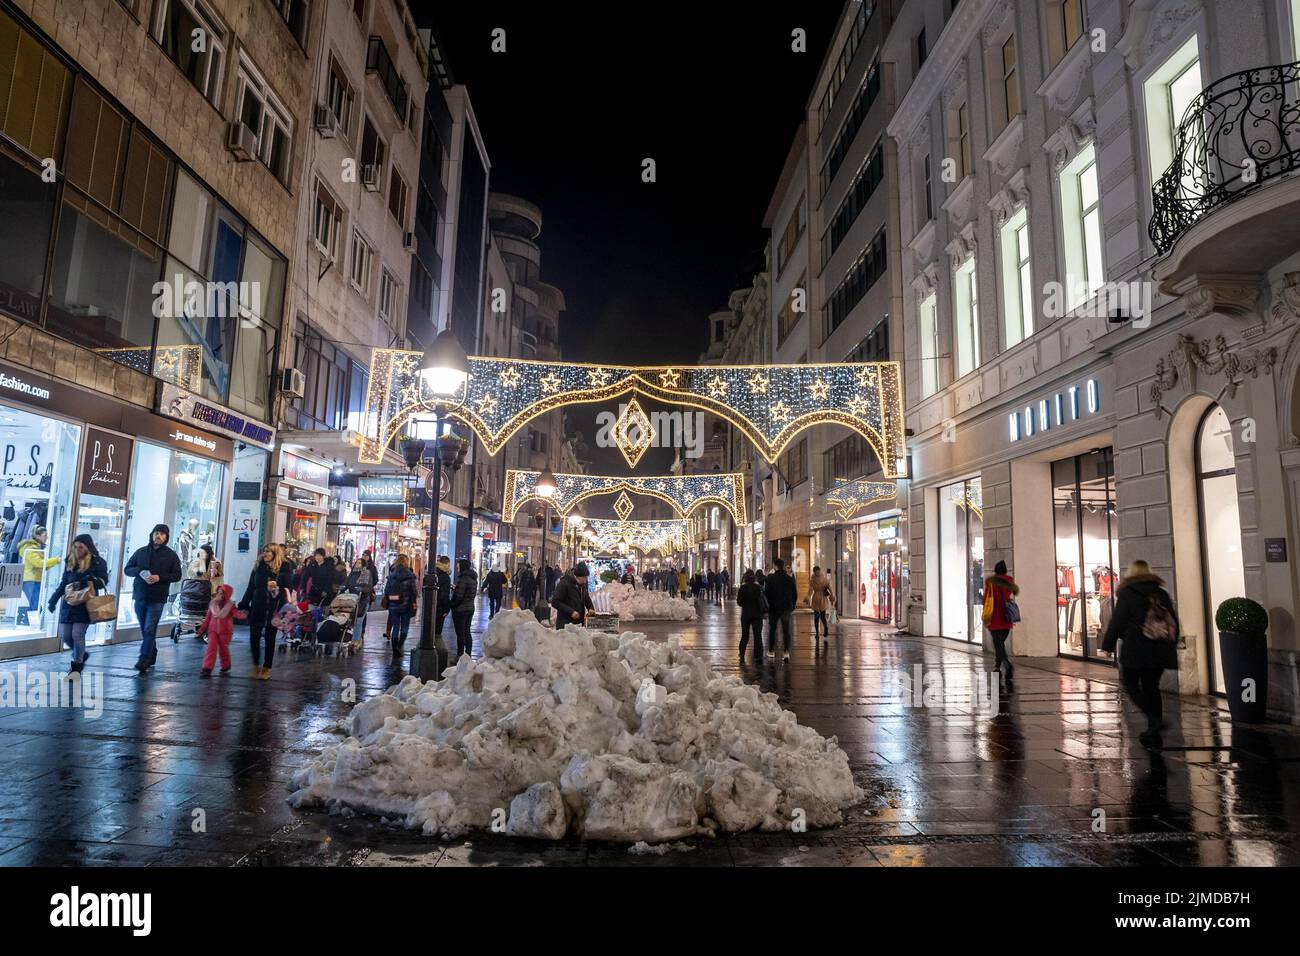 Picture of the crowded Kneza Mihailova street in belgrade, Serbia, illuminated for christmas, with snow, in december. Stock Photo